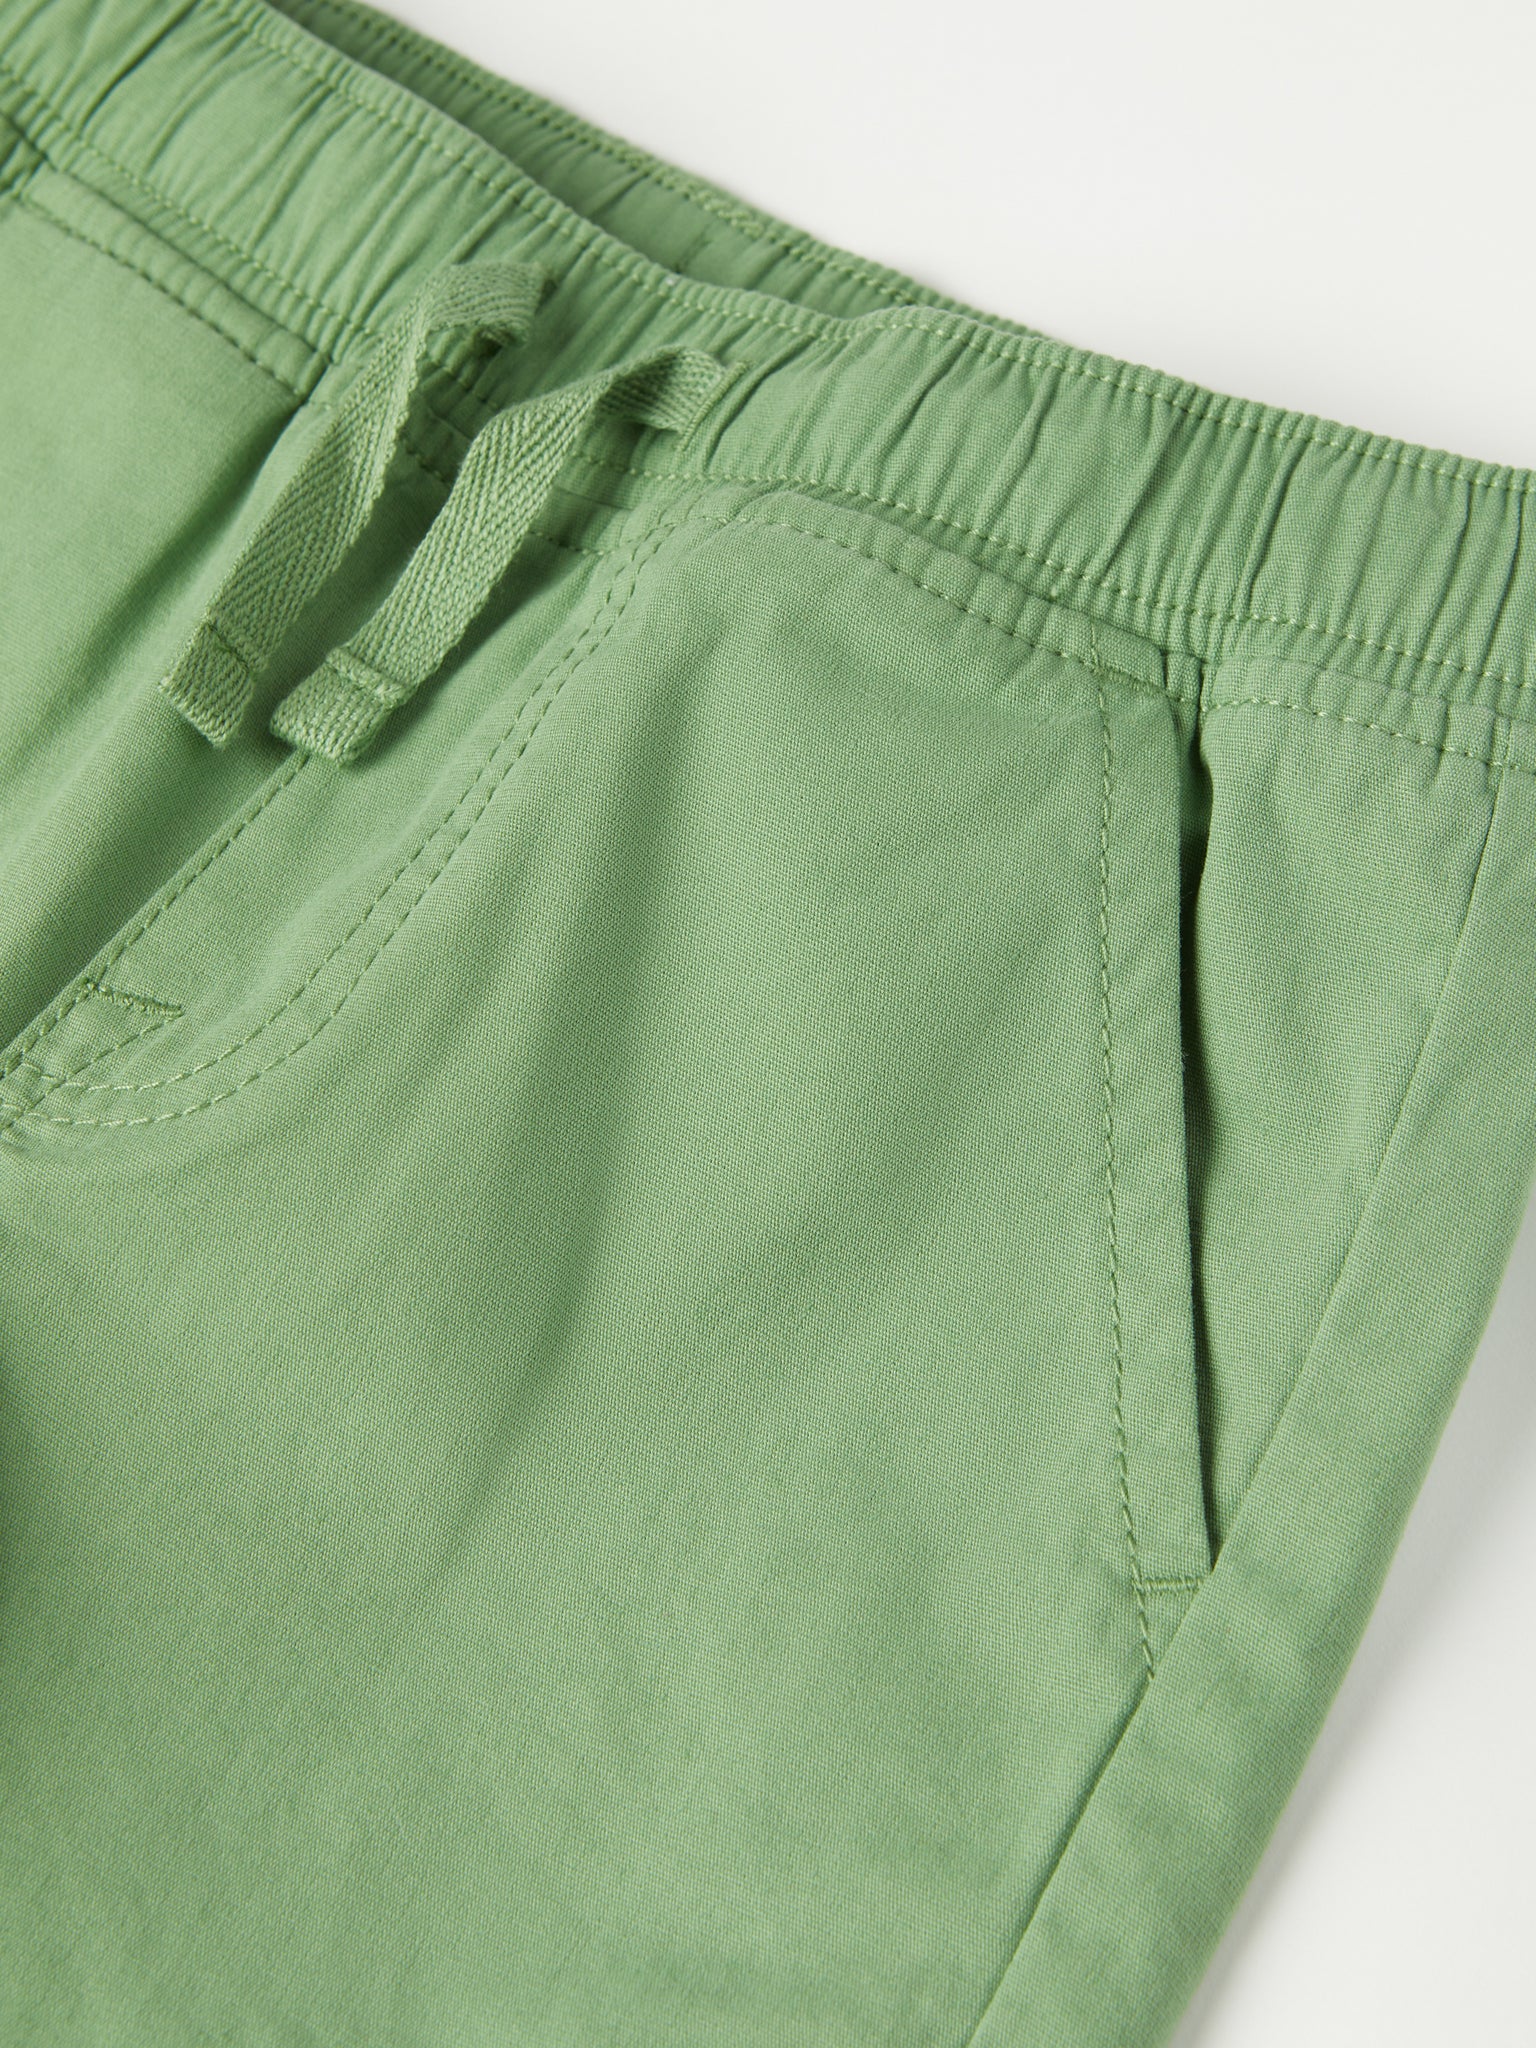 Green Kids Organic Chino Shorts from the Polarn O. Pyret kidswear collection. The best ethical kids clothes